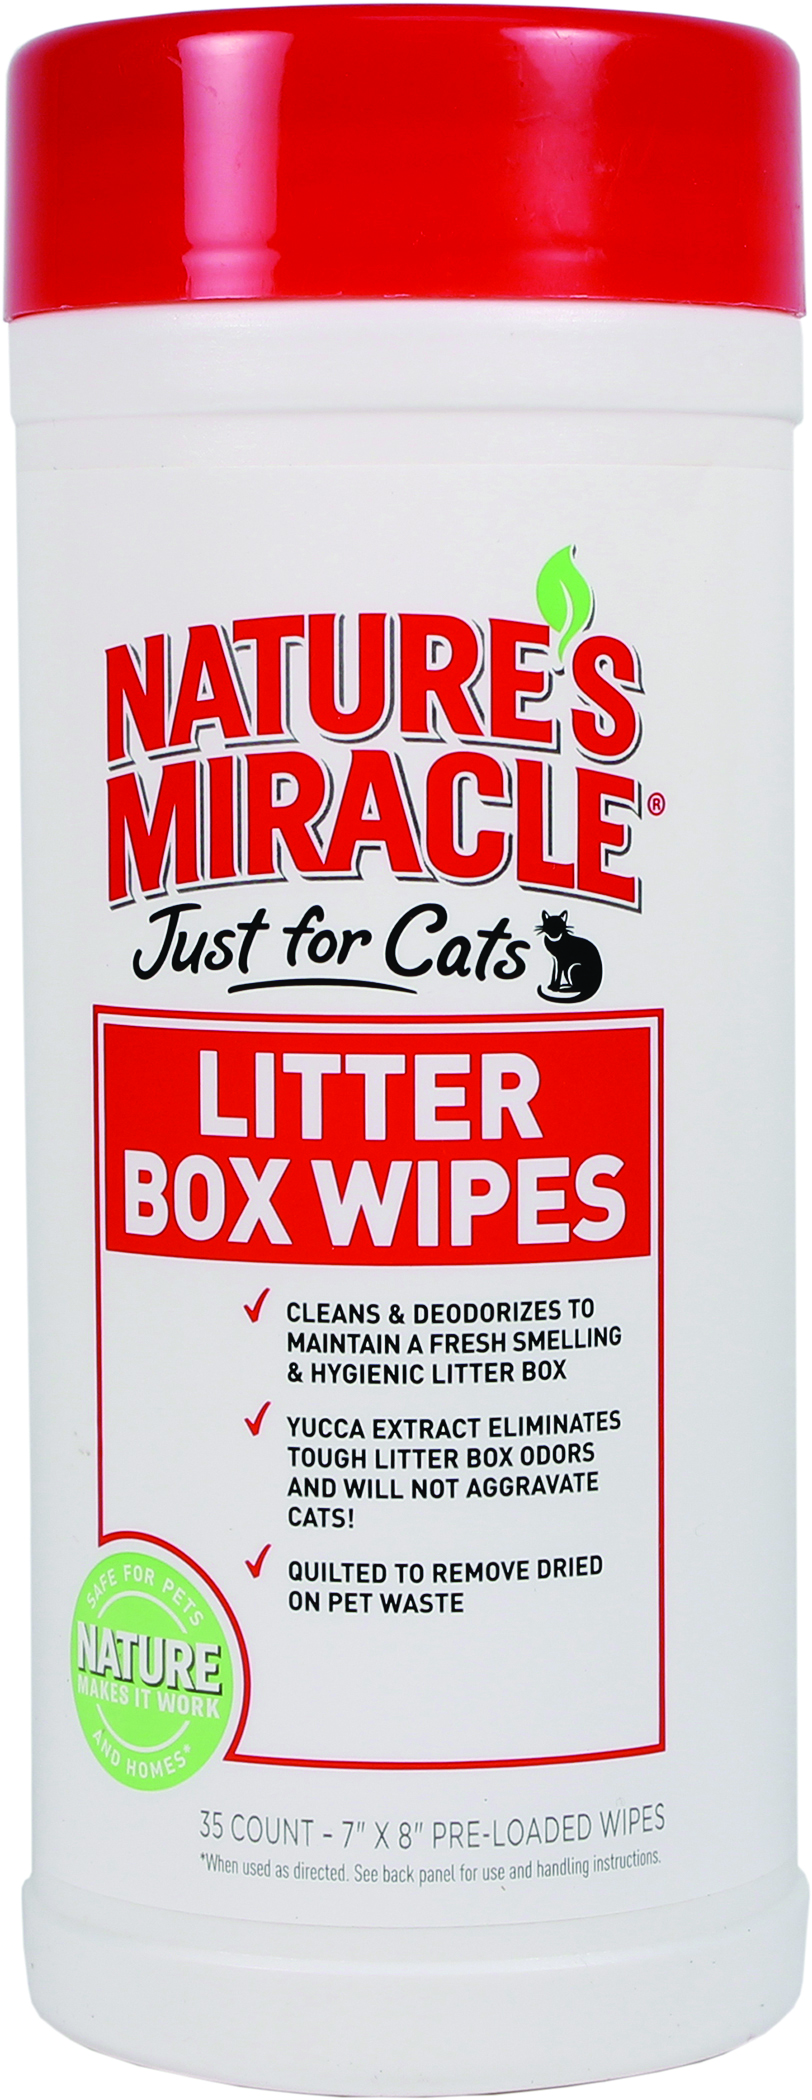 NATURES MIRACLE JUST FOR CATS LITTER BOX WIPES